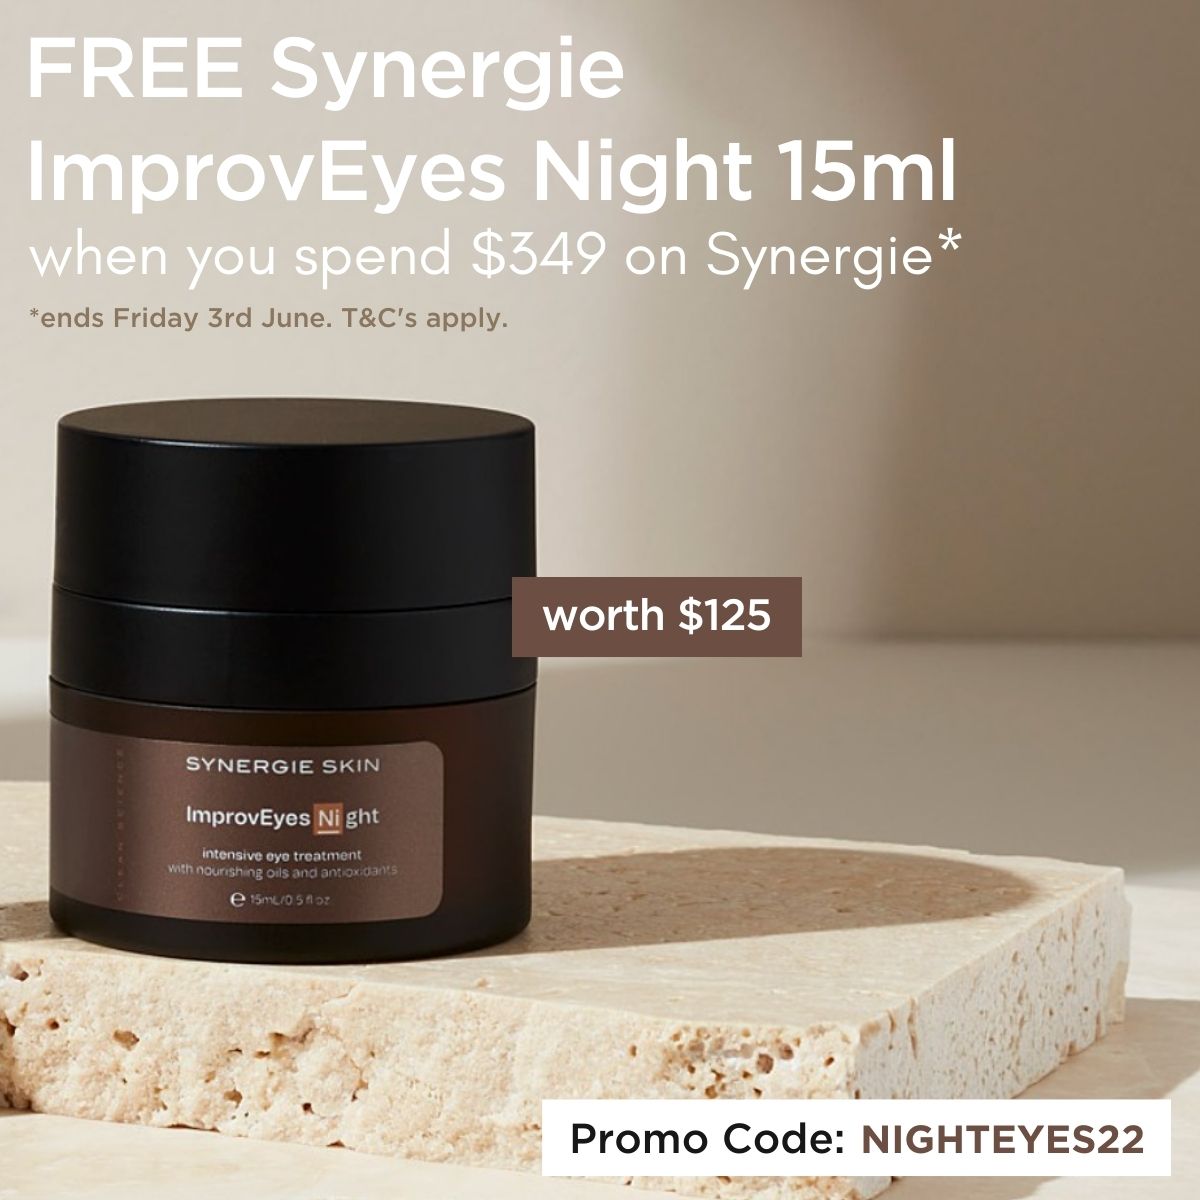 Free Synergie ImproveEyes Night 15ml Offer. Login to purchase if enabled for Synergie or Email/Phone to Enquire.